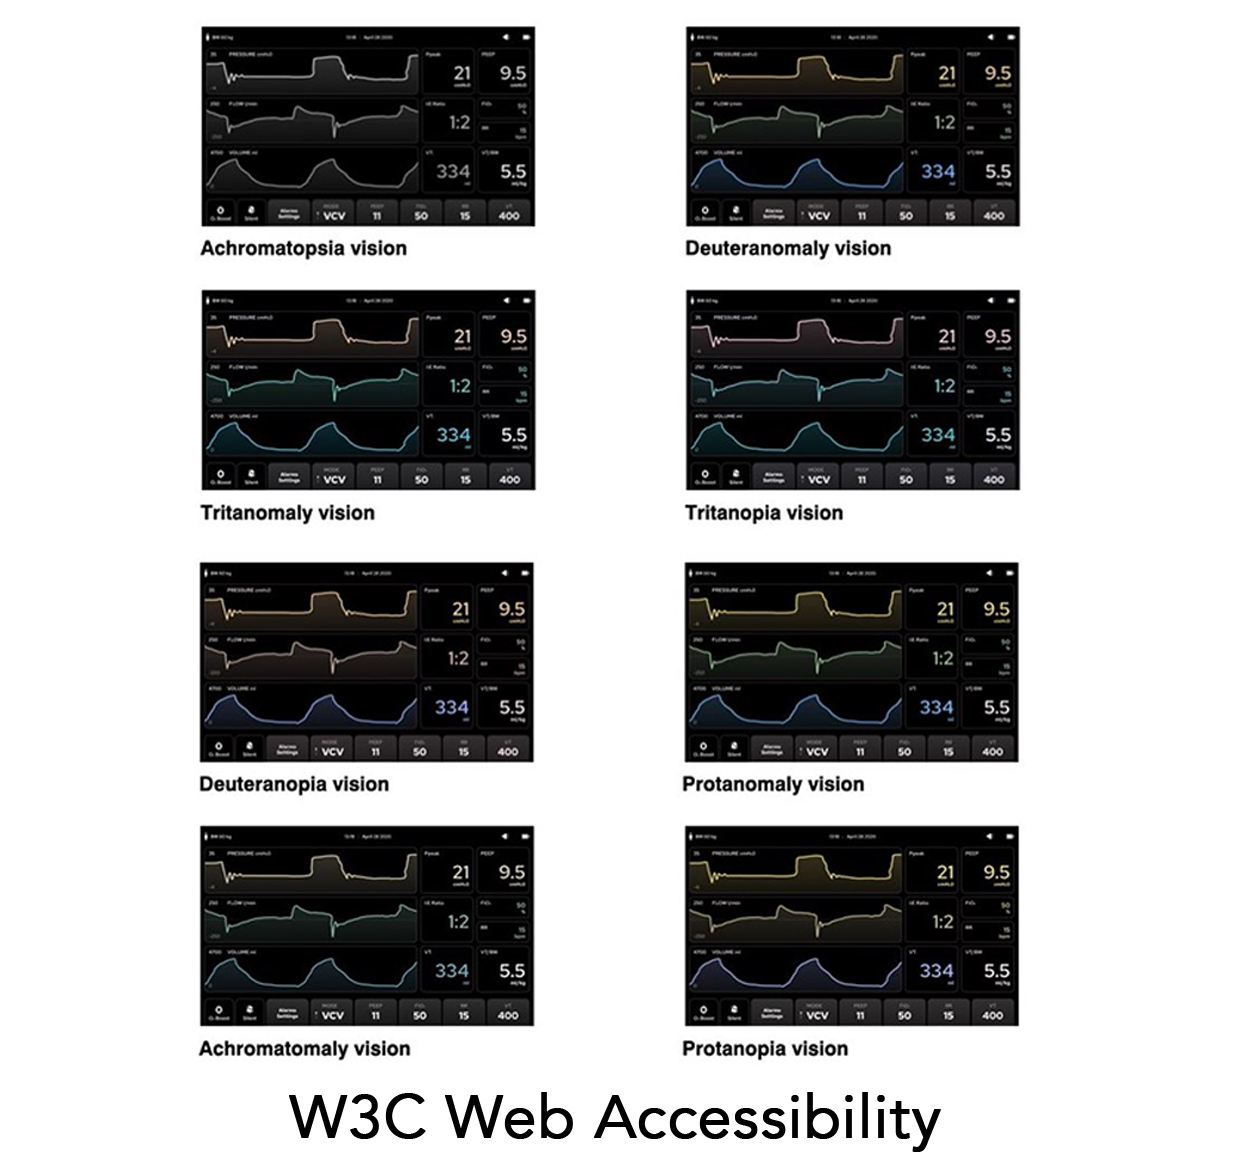 Our product’s accessibility enhance the usability for all users, including those with low vision. 
  Our UI meet (W3C) AAA grade contrast ratio and works across color blindness visions.